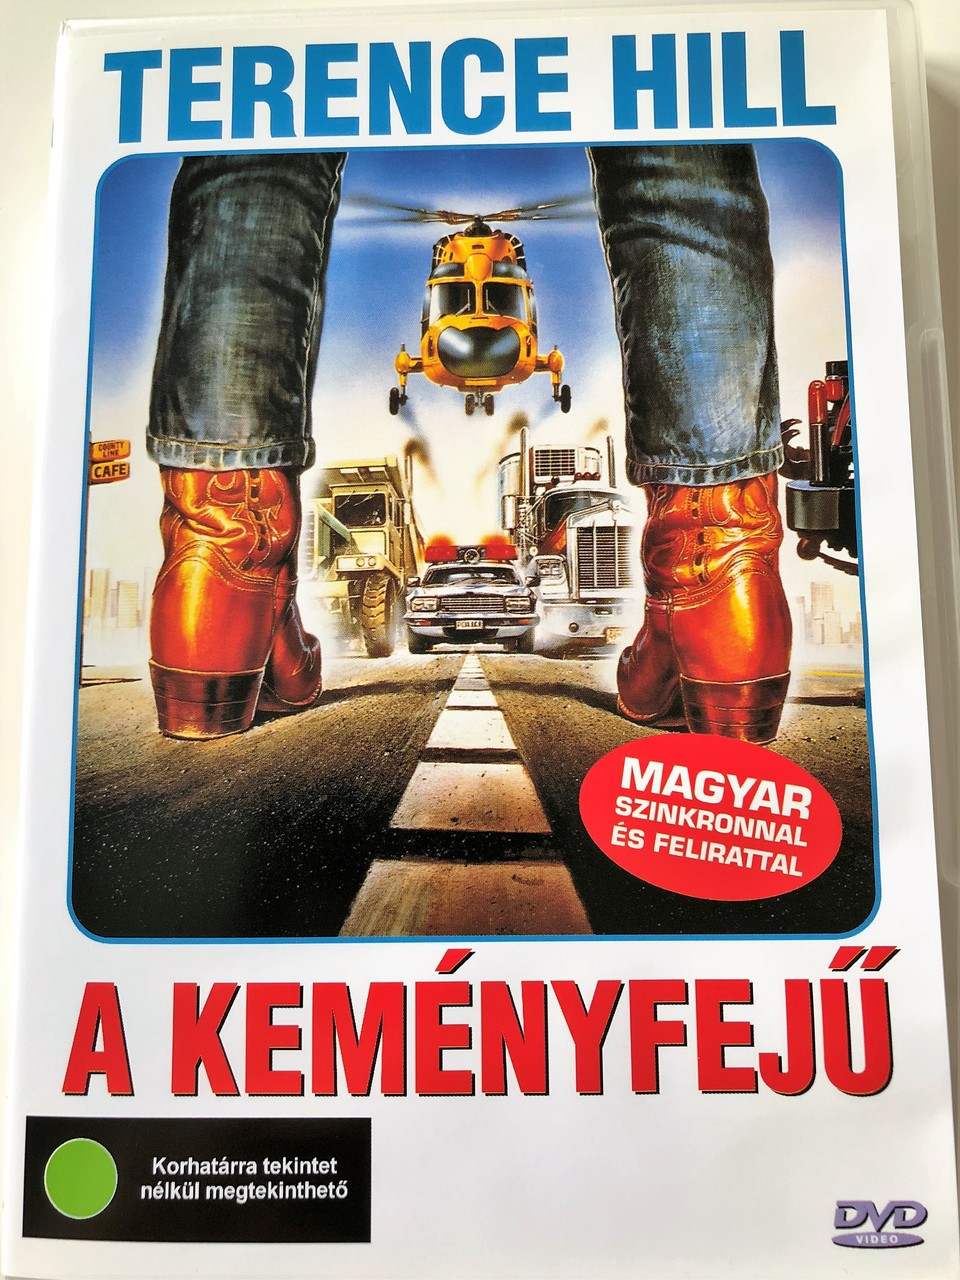 A keményfejű DVD 1987 (Renegade) / They Call Me Renegade / Audio: Hungarian  and English / Subtitle: Hungarian / Starring: Terence Hill, Robert Vaughn,  Norman Bowler and Ross Hill / Directed by: E.B. Clucher - bibleinmylanguage